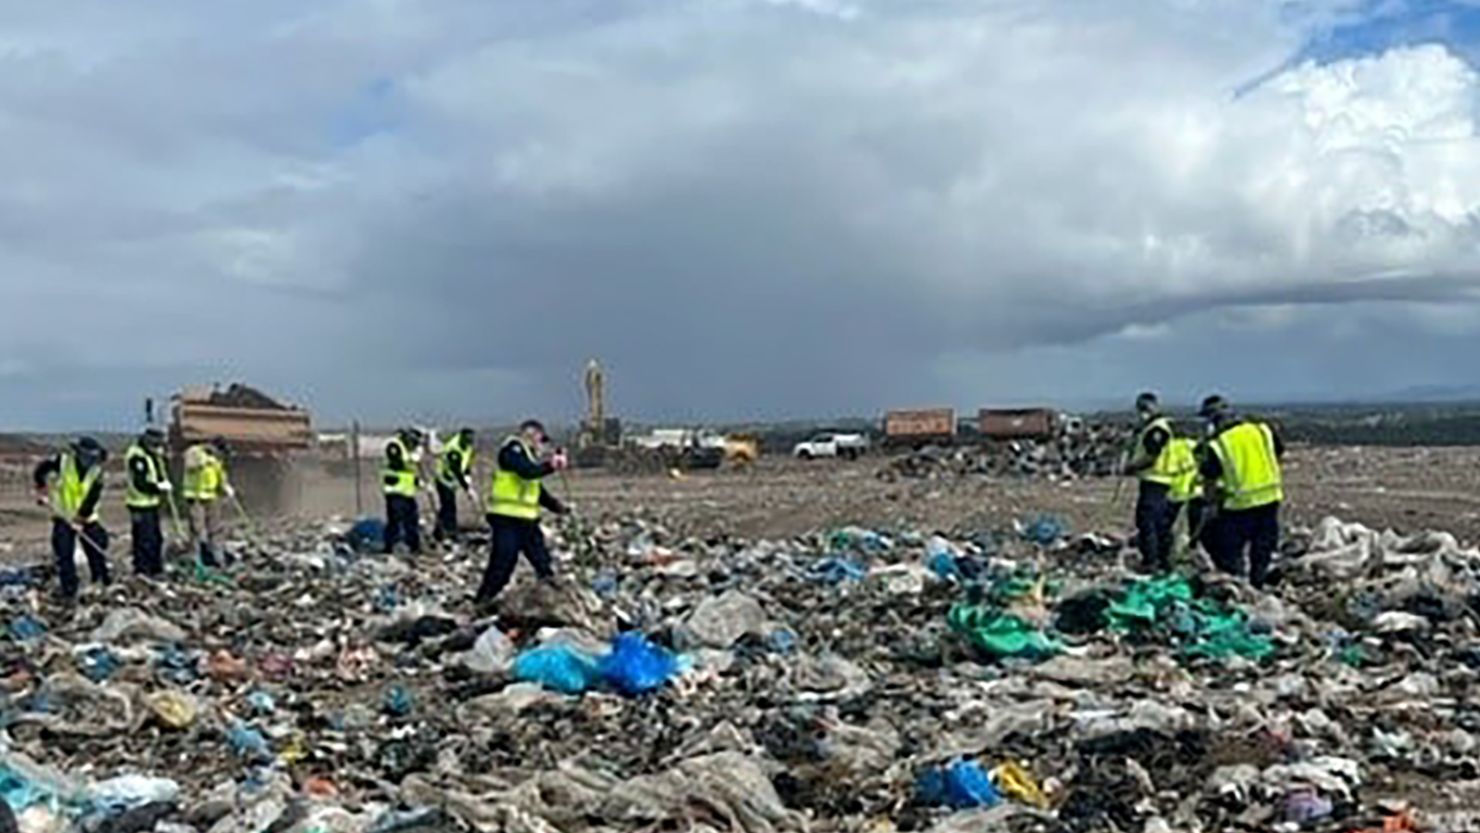 The search for missing woman Lesley Trotter's body has entered its seventh day at the Swanbank refuse site.